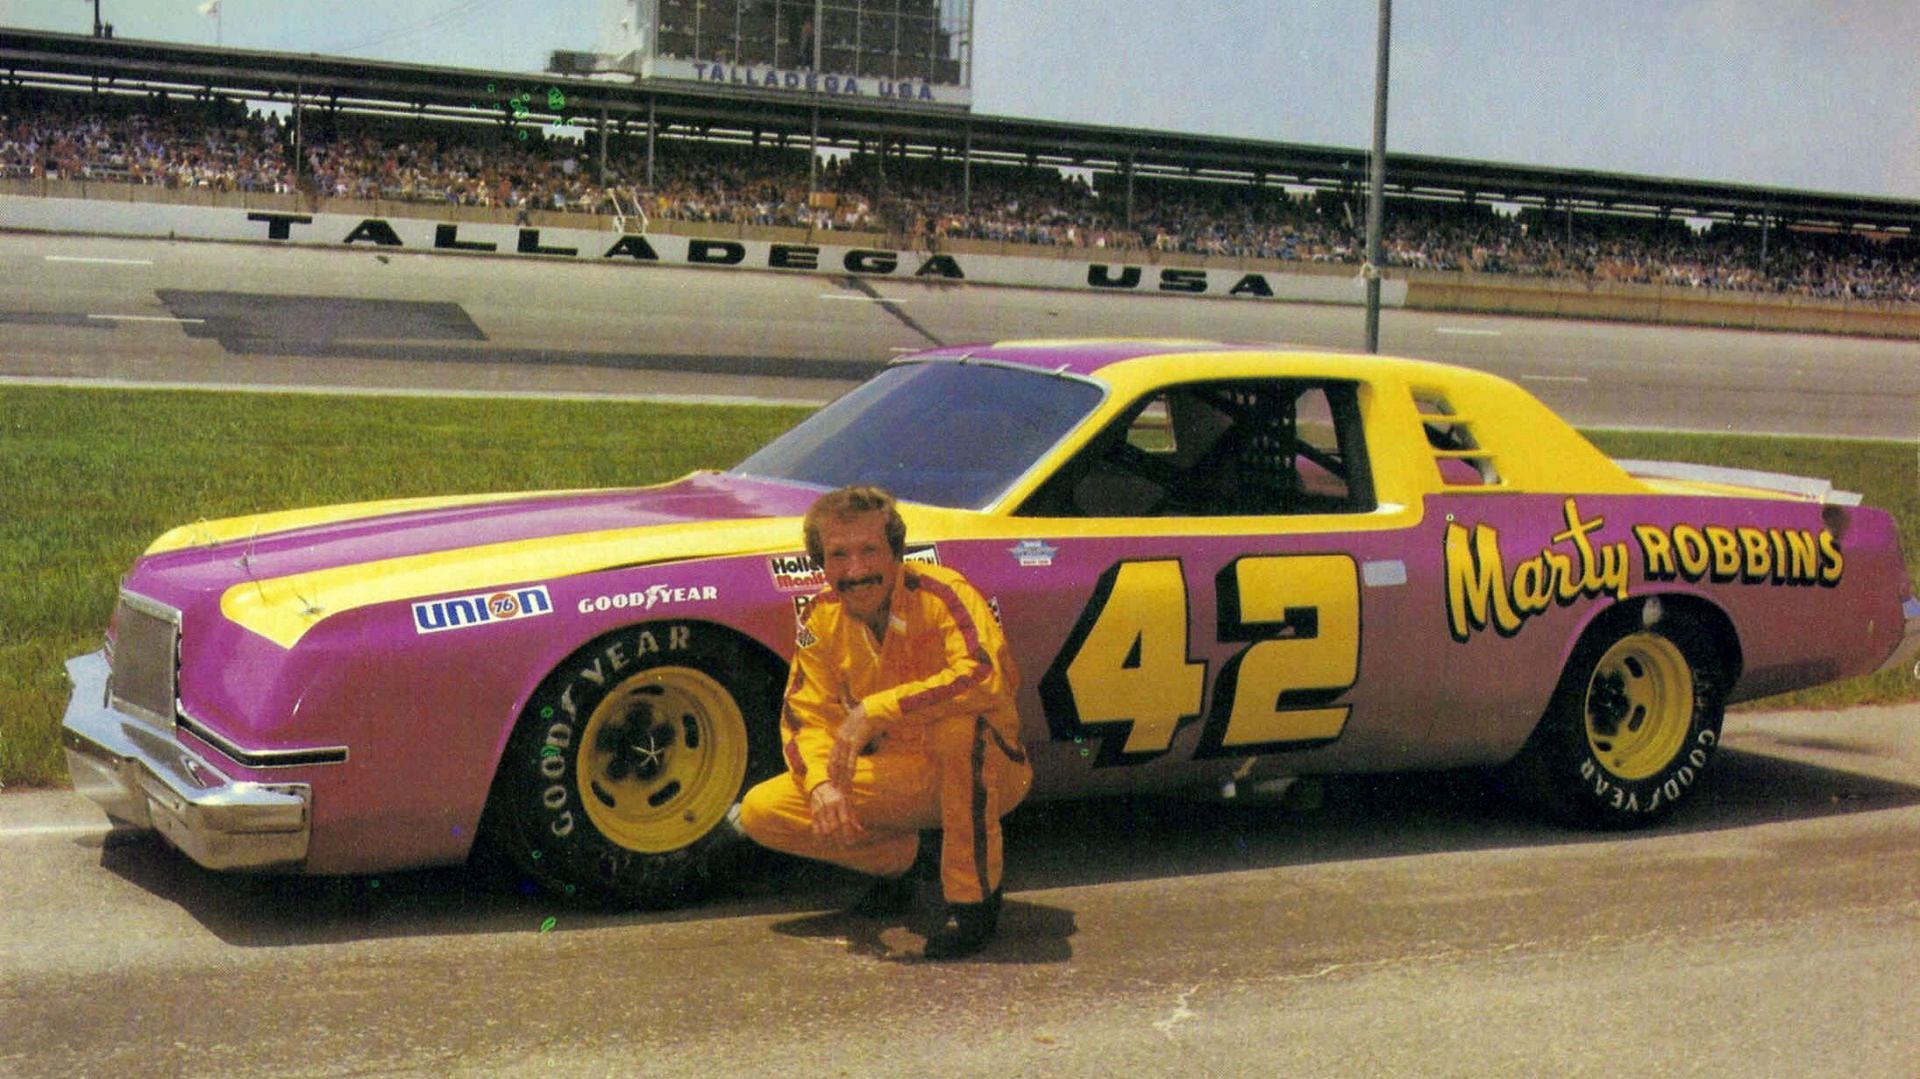 Late Grammy award-winning singer turned NASCAR Cup Series driver Marty Robbins